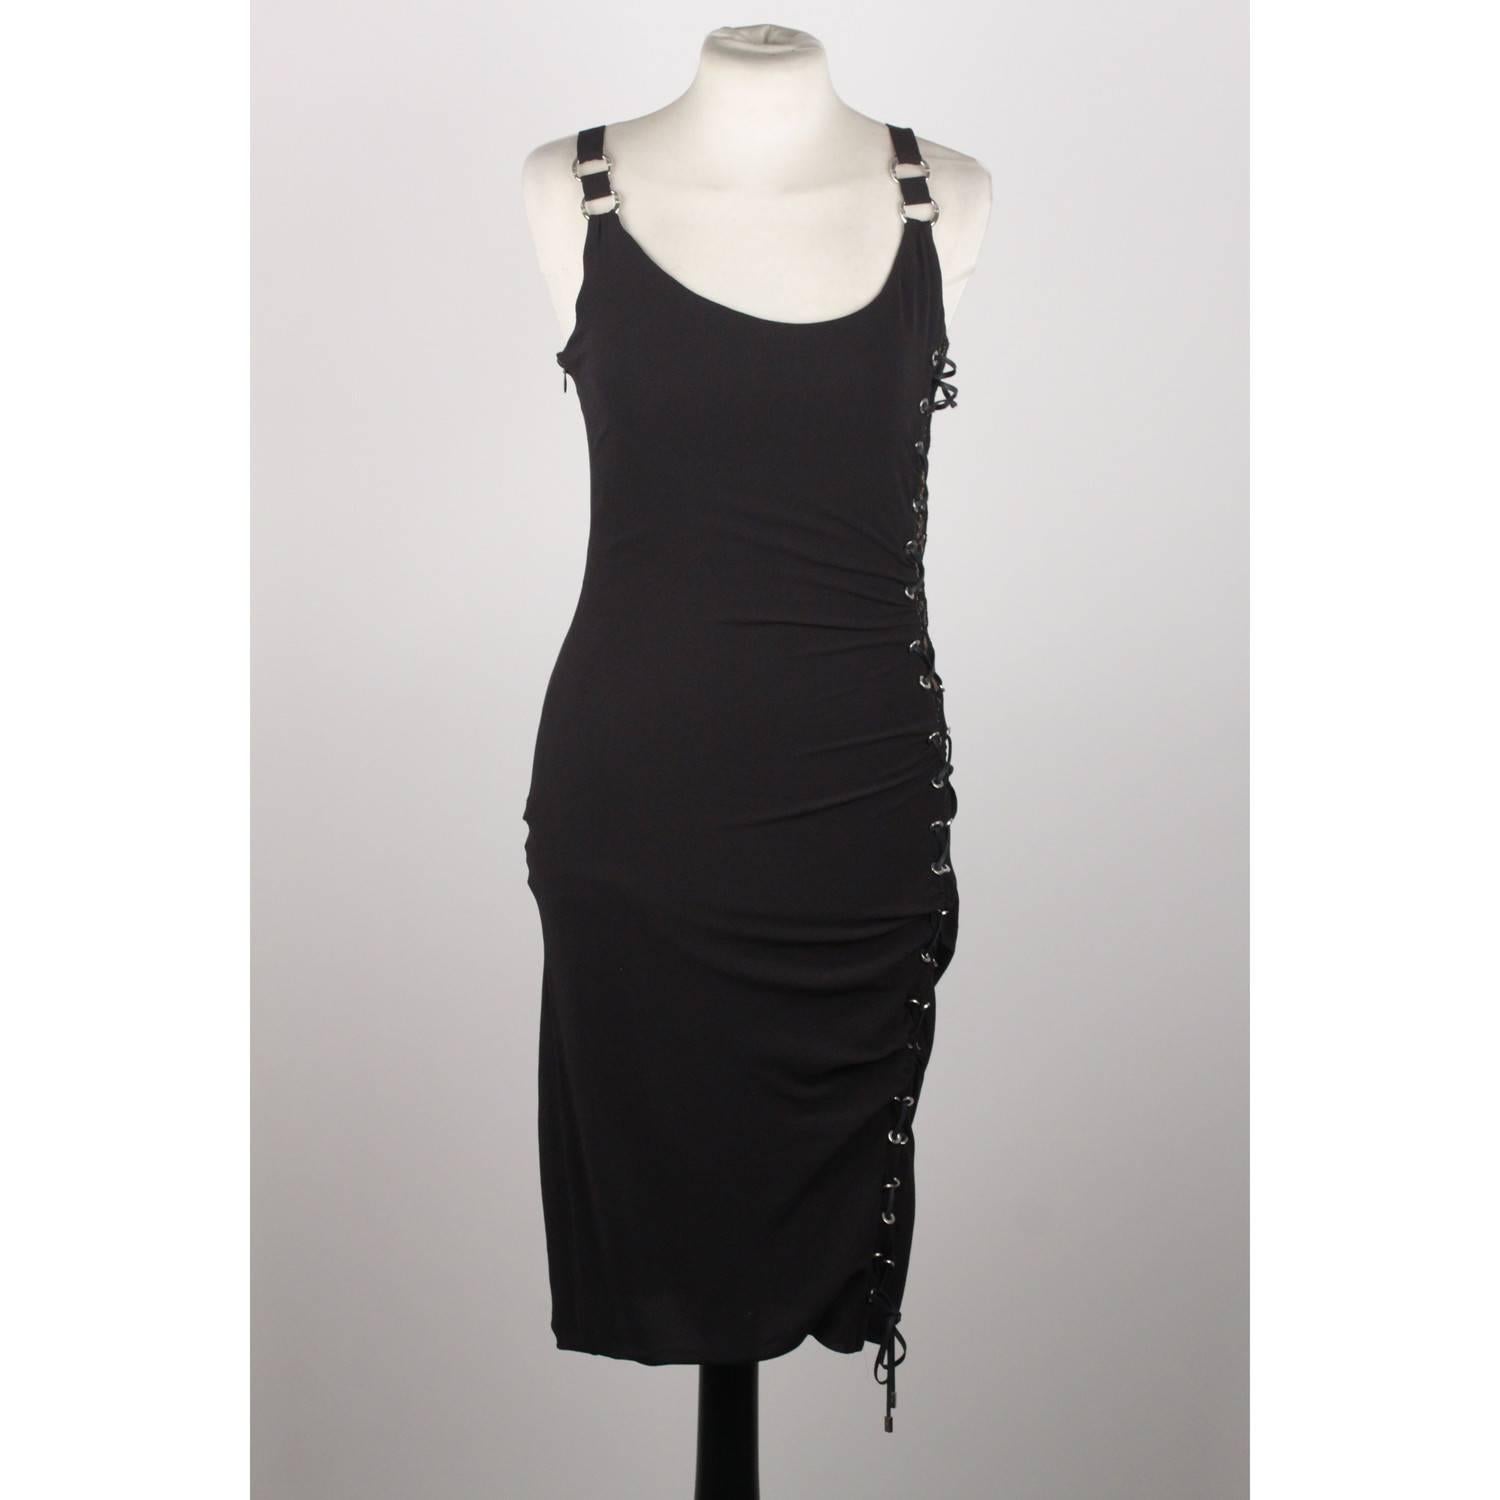 Soft and lightweight fabric little black dress by VERSACE. It features scoop neck, close-cut bodycon fit, side zip closure. Beautiful lace panel on the side with lace up detailing. Composition: 90% Silk, 8% Elastane, 2%  Nylon. Size 40.